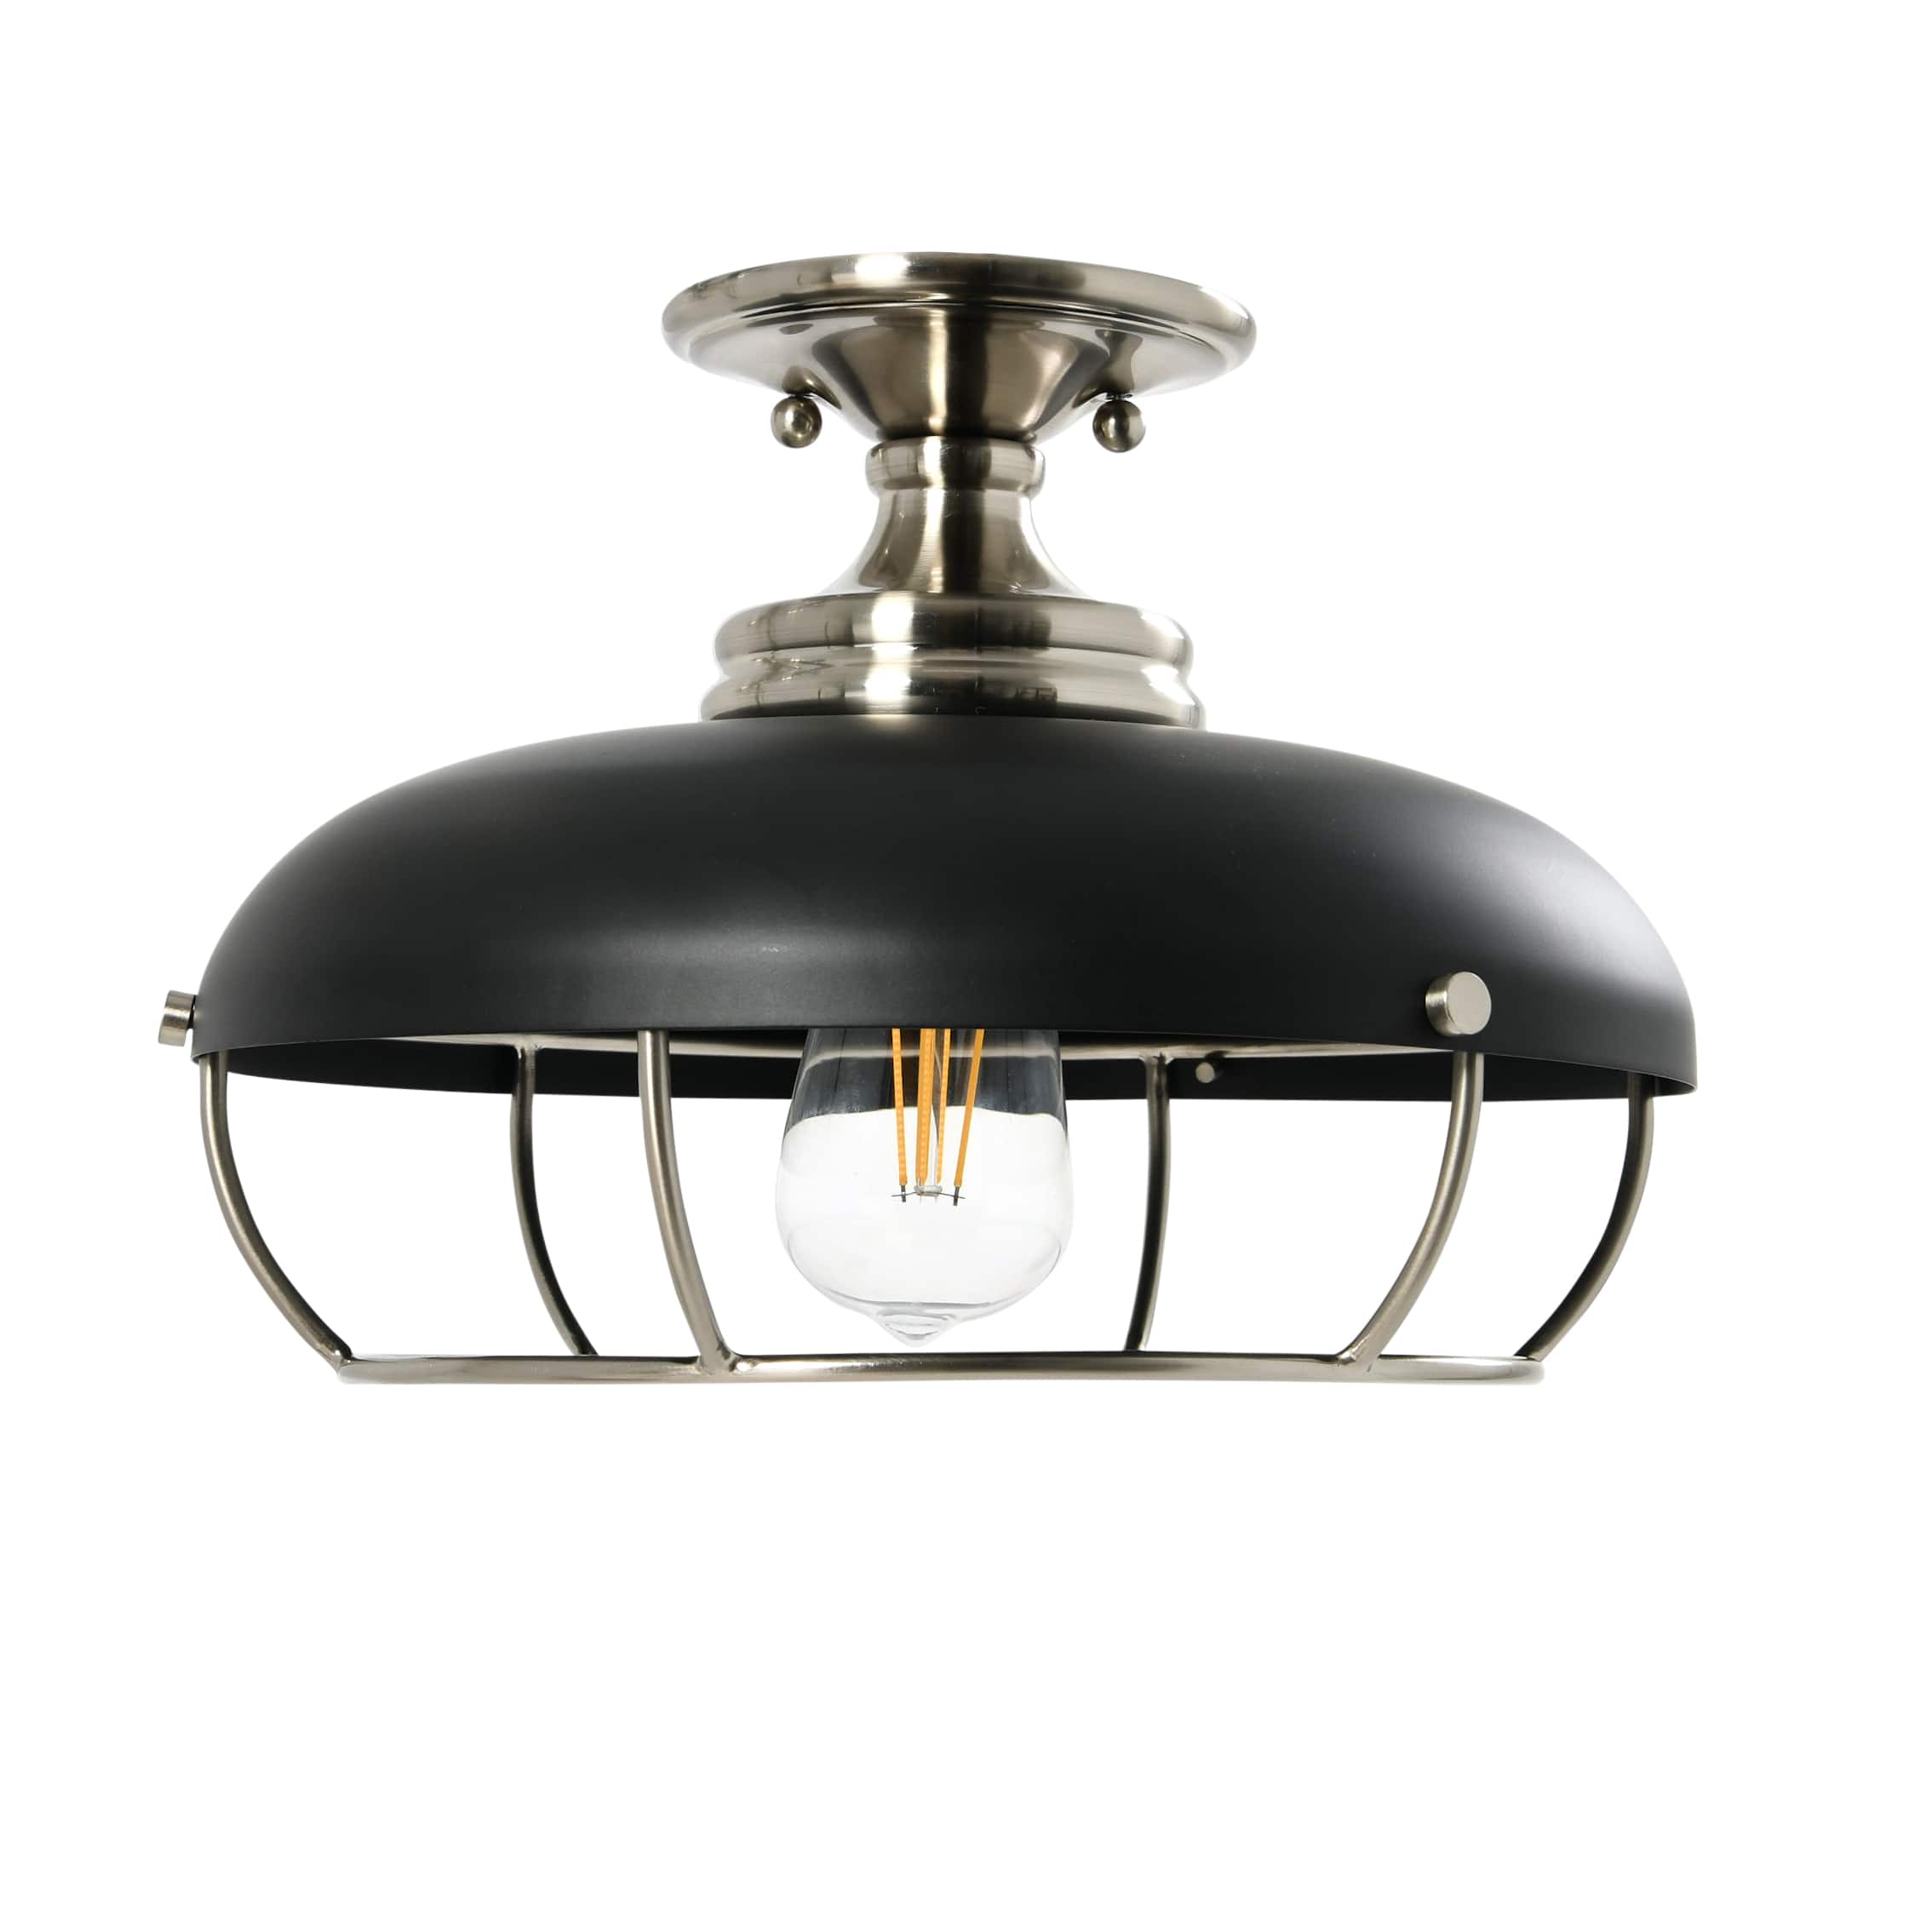 13" Wide Caged Dome Metal Semi-Flush Mount Ceiling Light